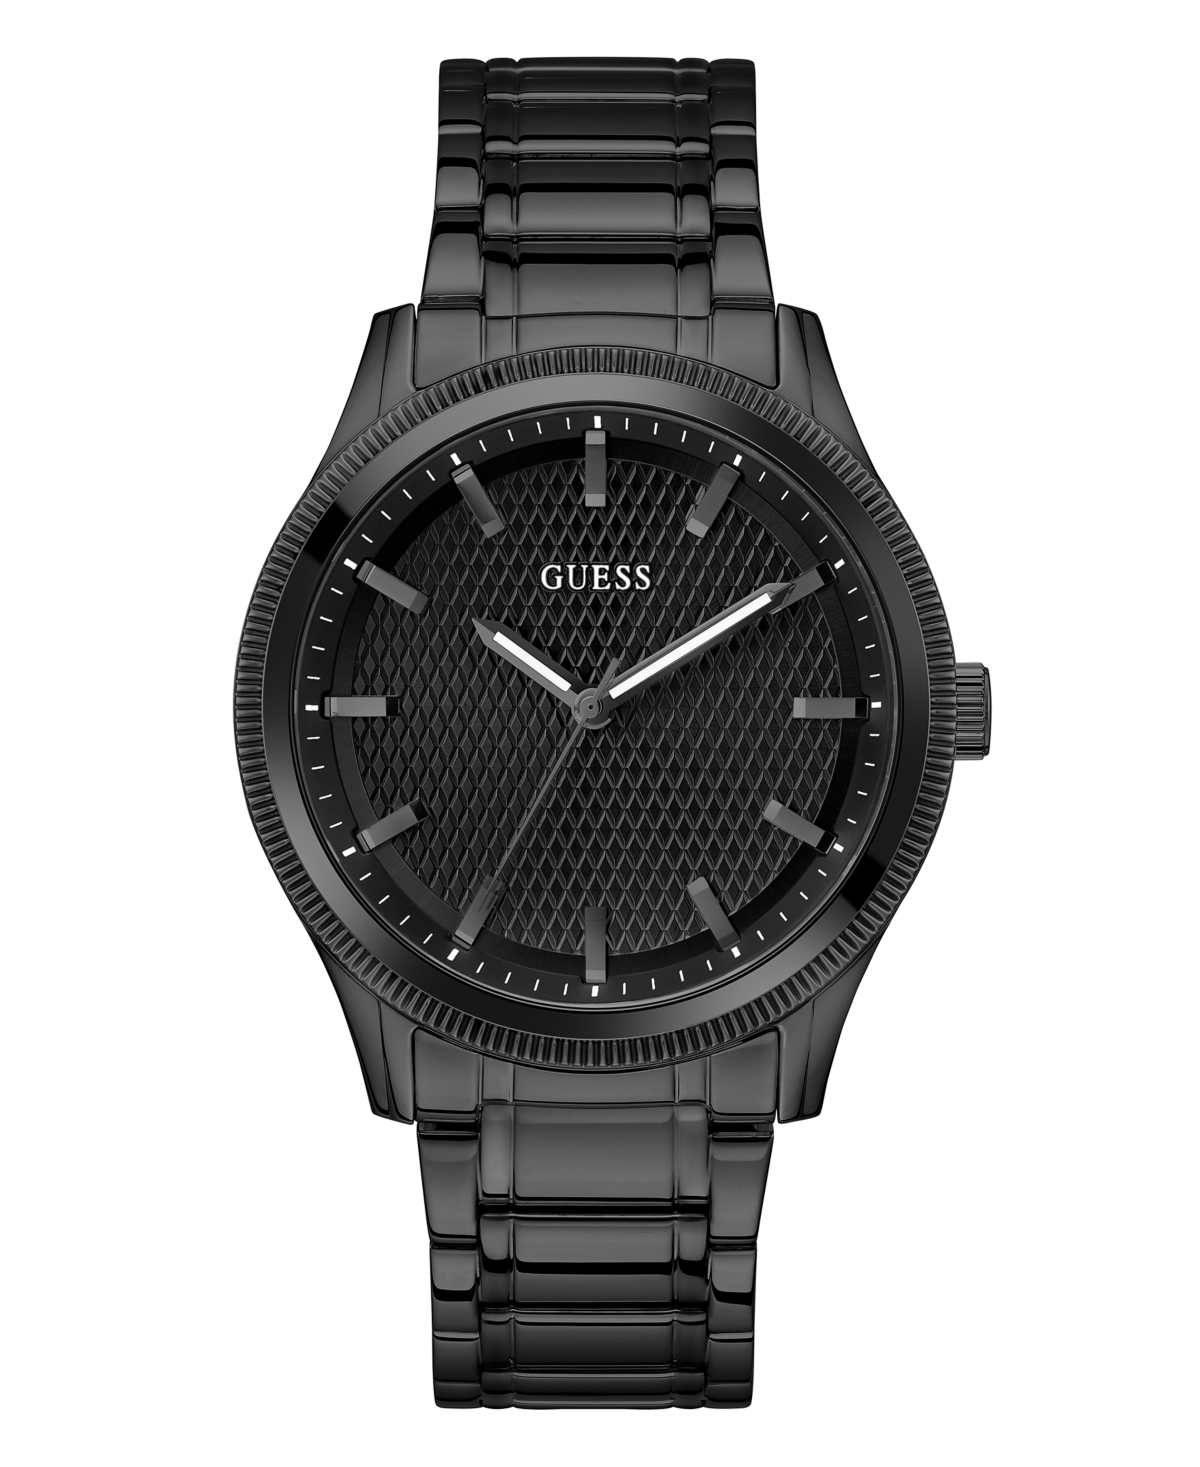 Guess Men's Analog Black Stainless Steel Watch 44mm